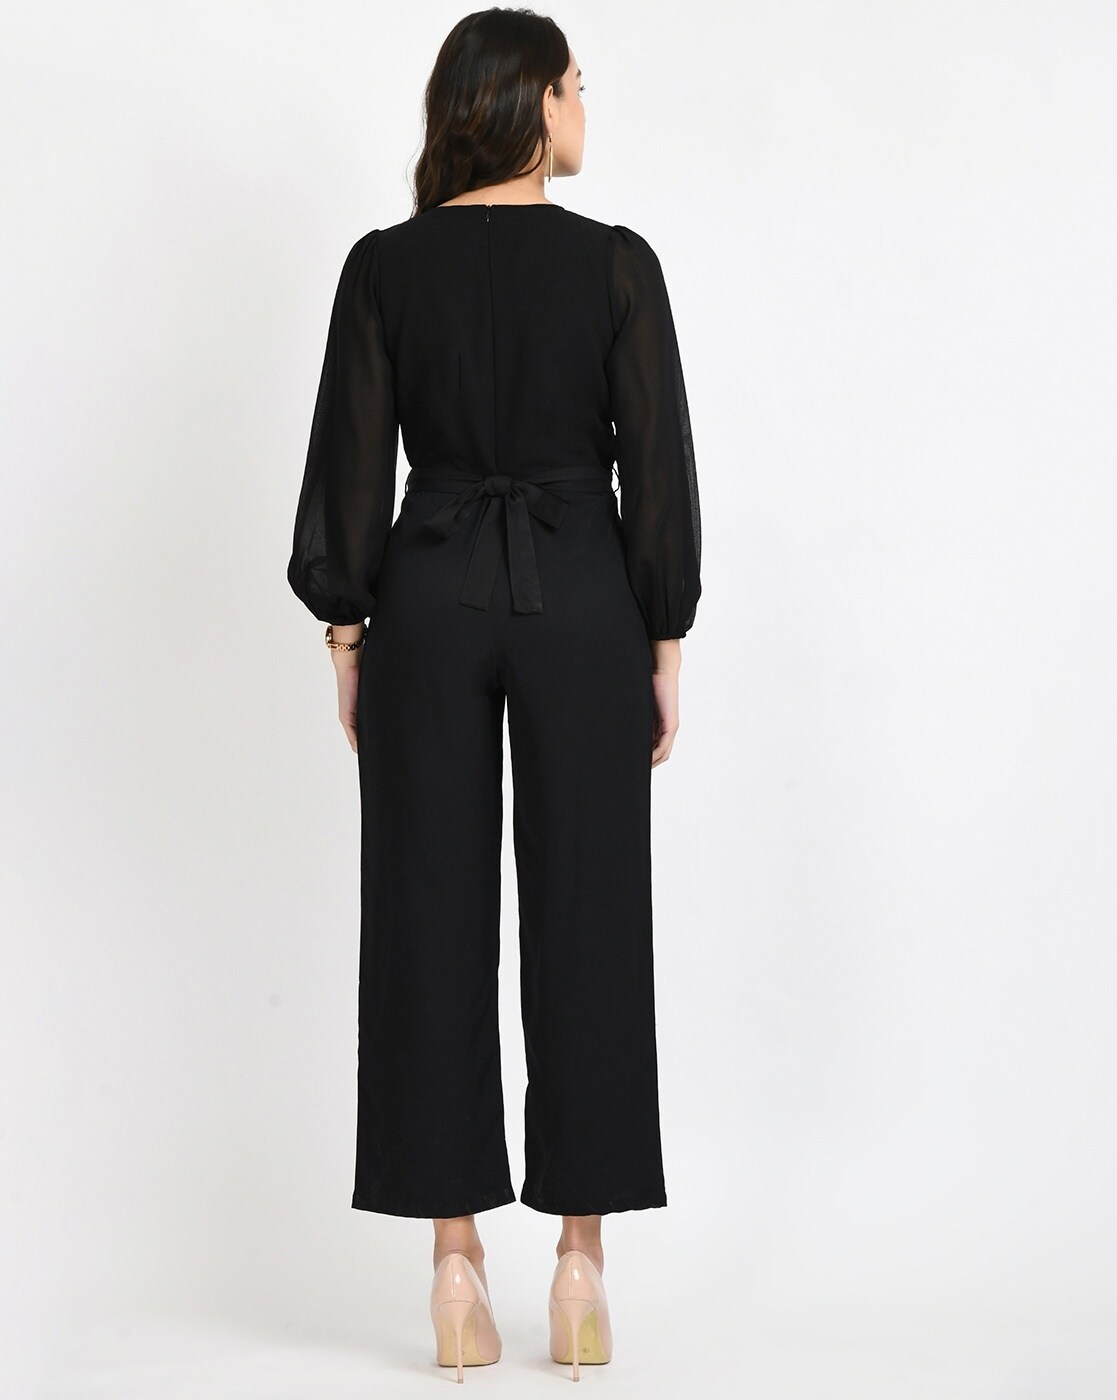 Need A Date Long Sleeve Jumpsuit - Black